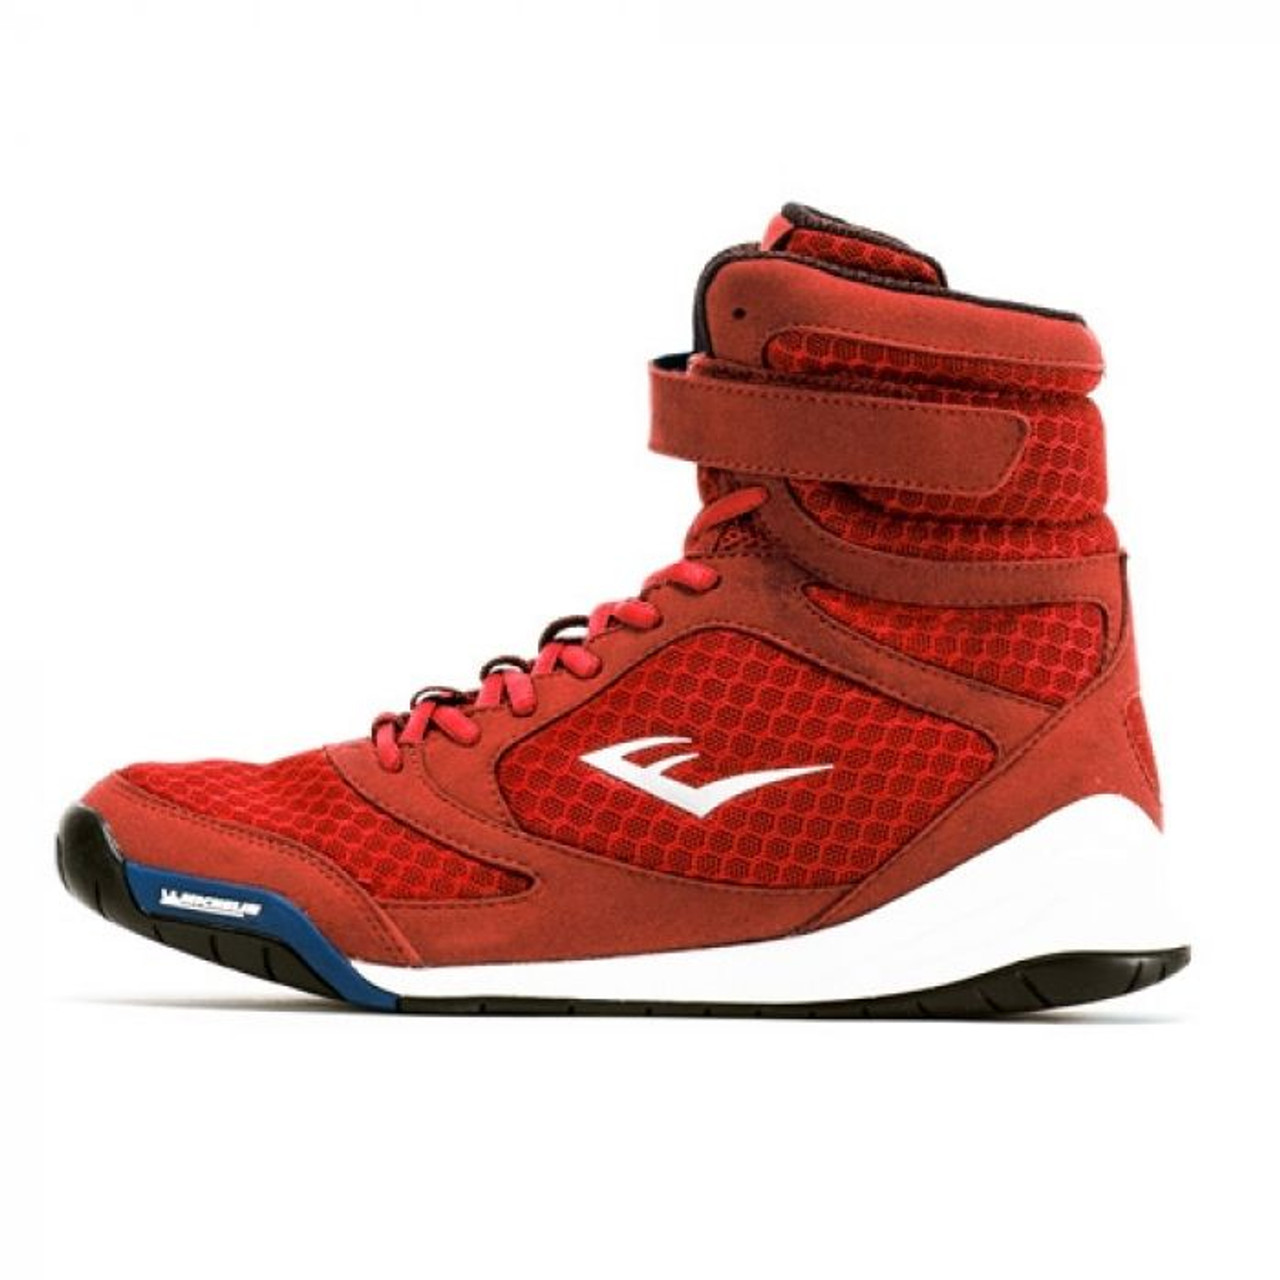 Everlast Elite High Top Boxing Shoes 